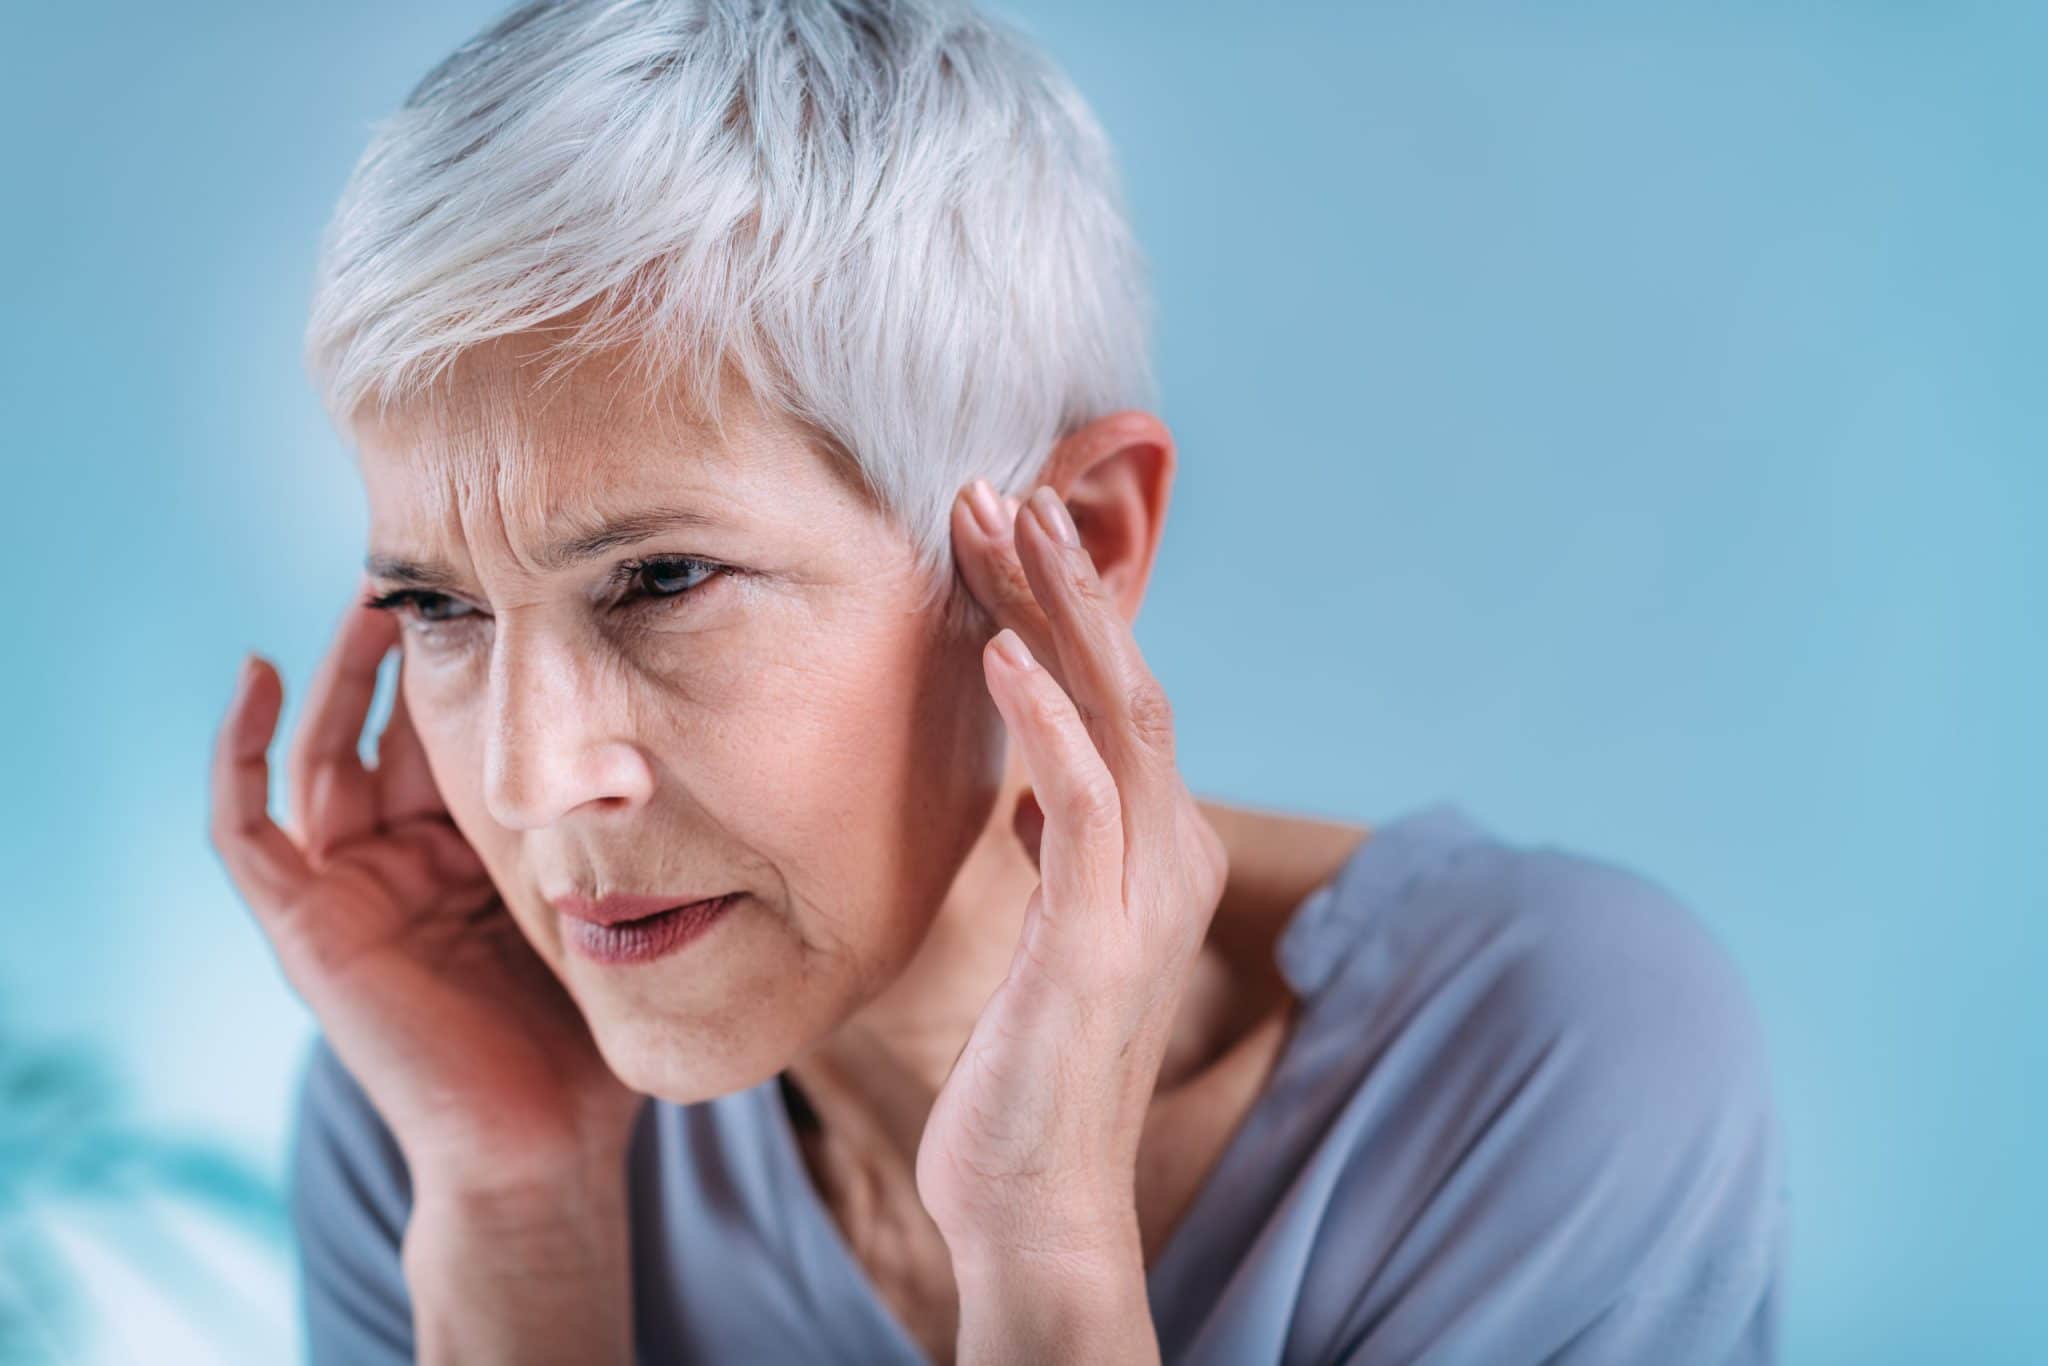 woman suffering from tinnitus due to B12 deficiency